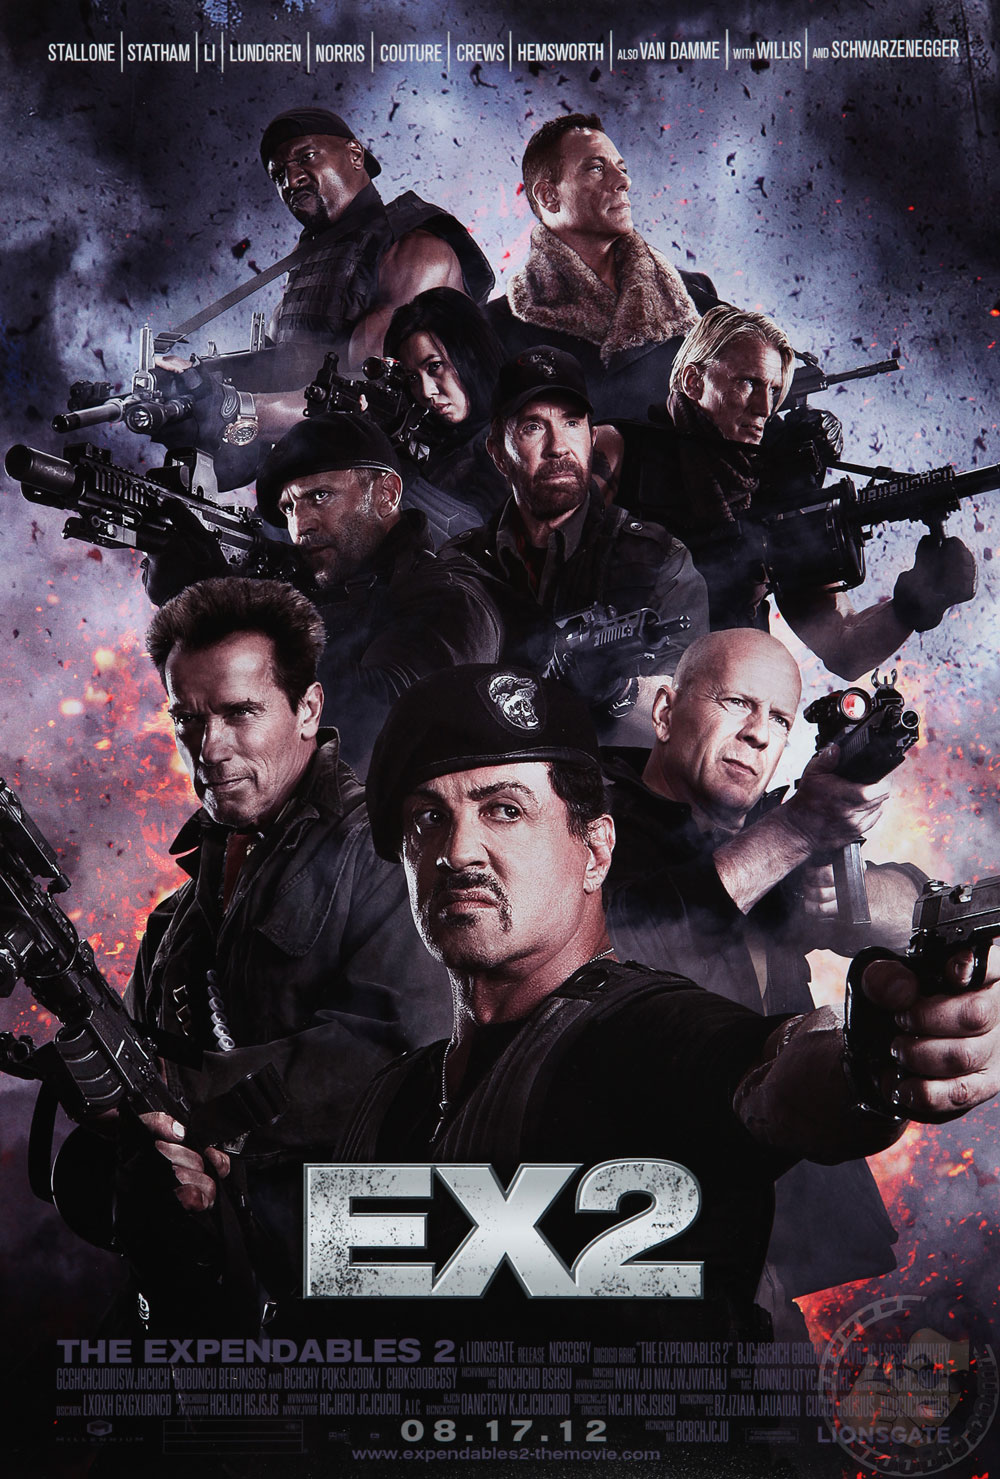 expendables-2-poster.jpg